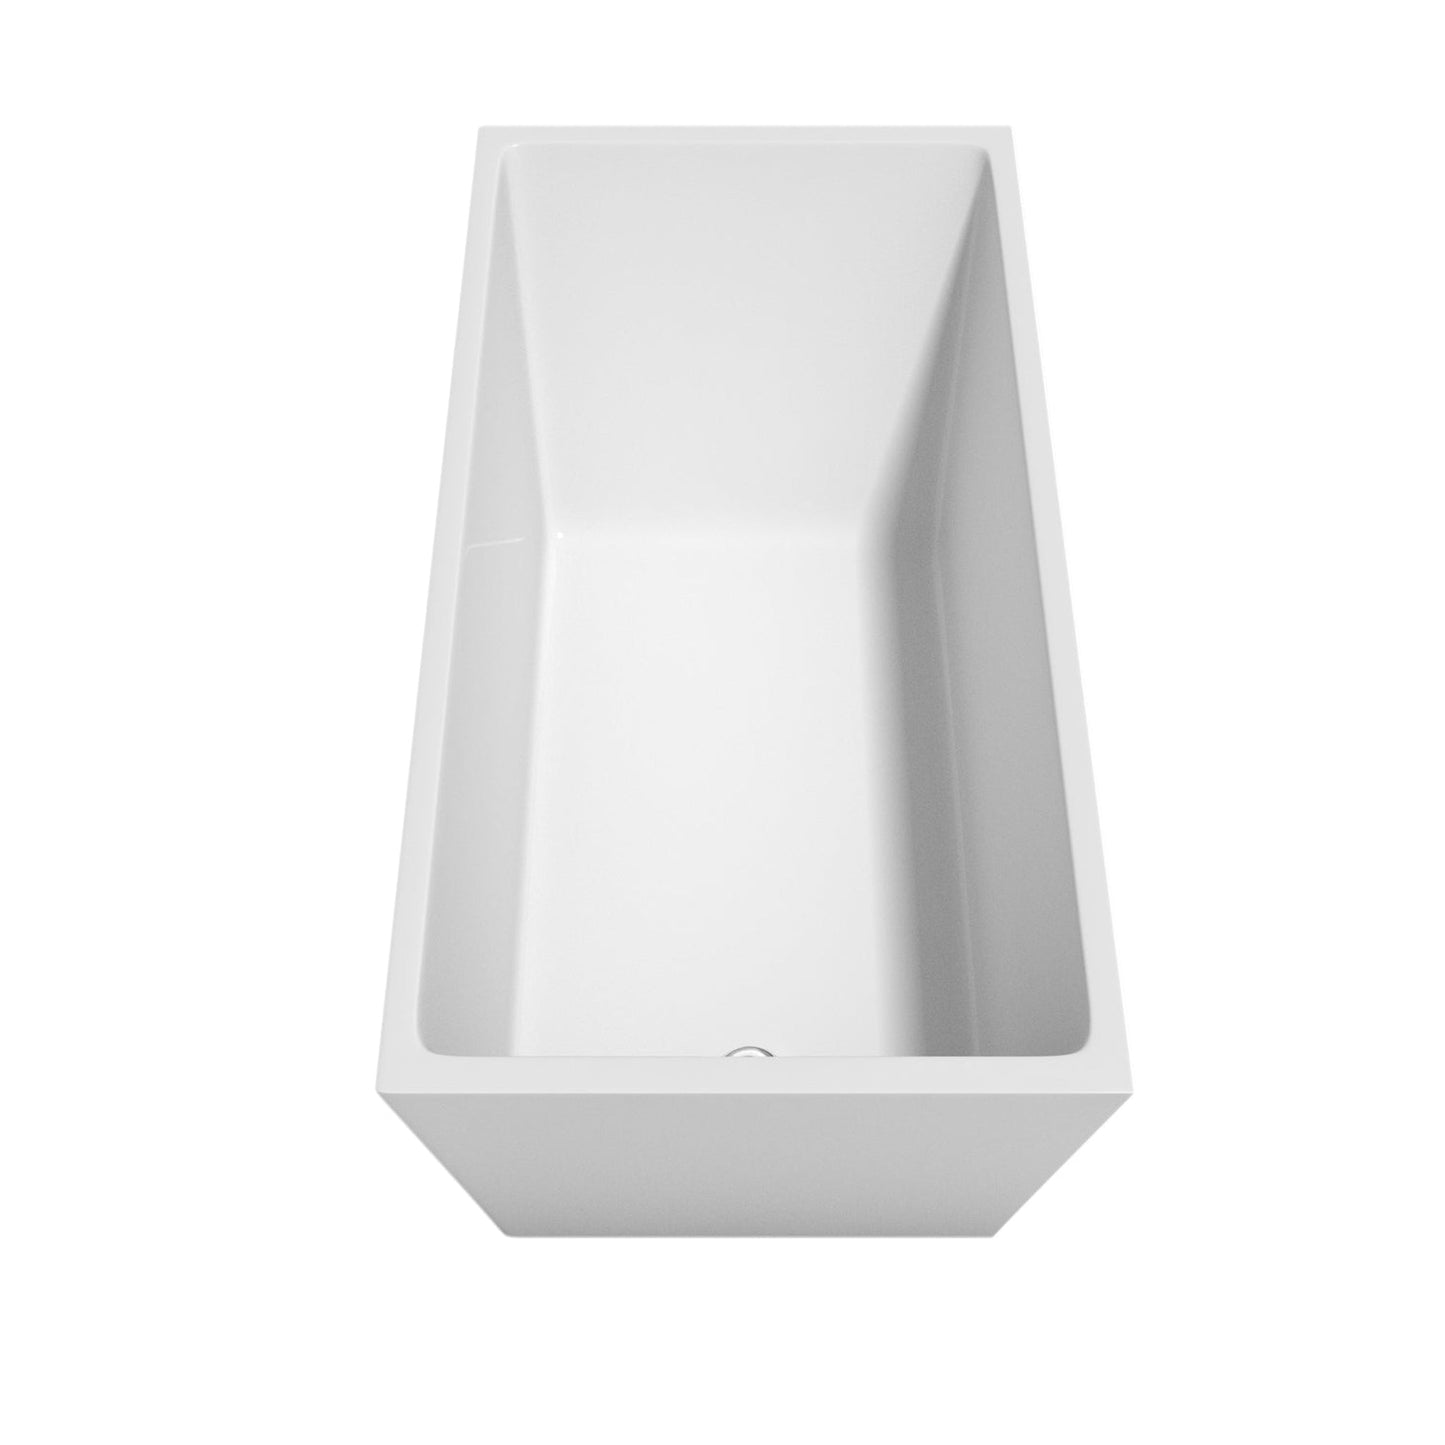 Wyndham Collection Hannah 59" Freestanding Bathtub in White With Polished Chrome Drain and Overflow Trim